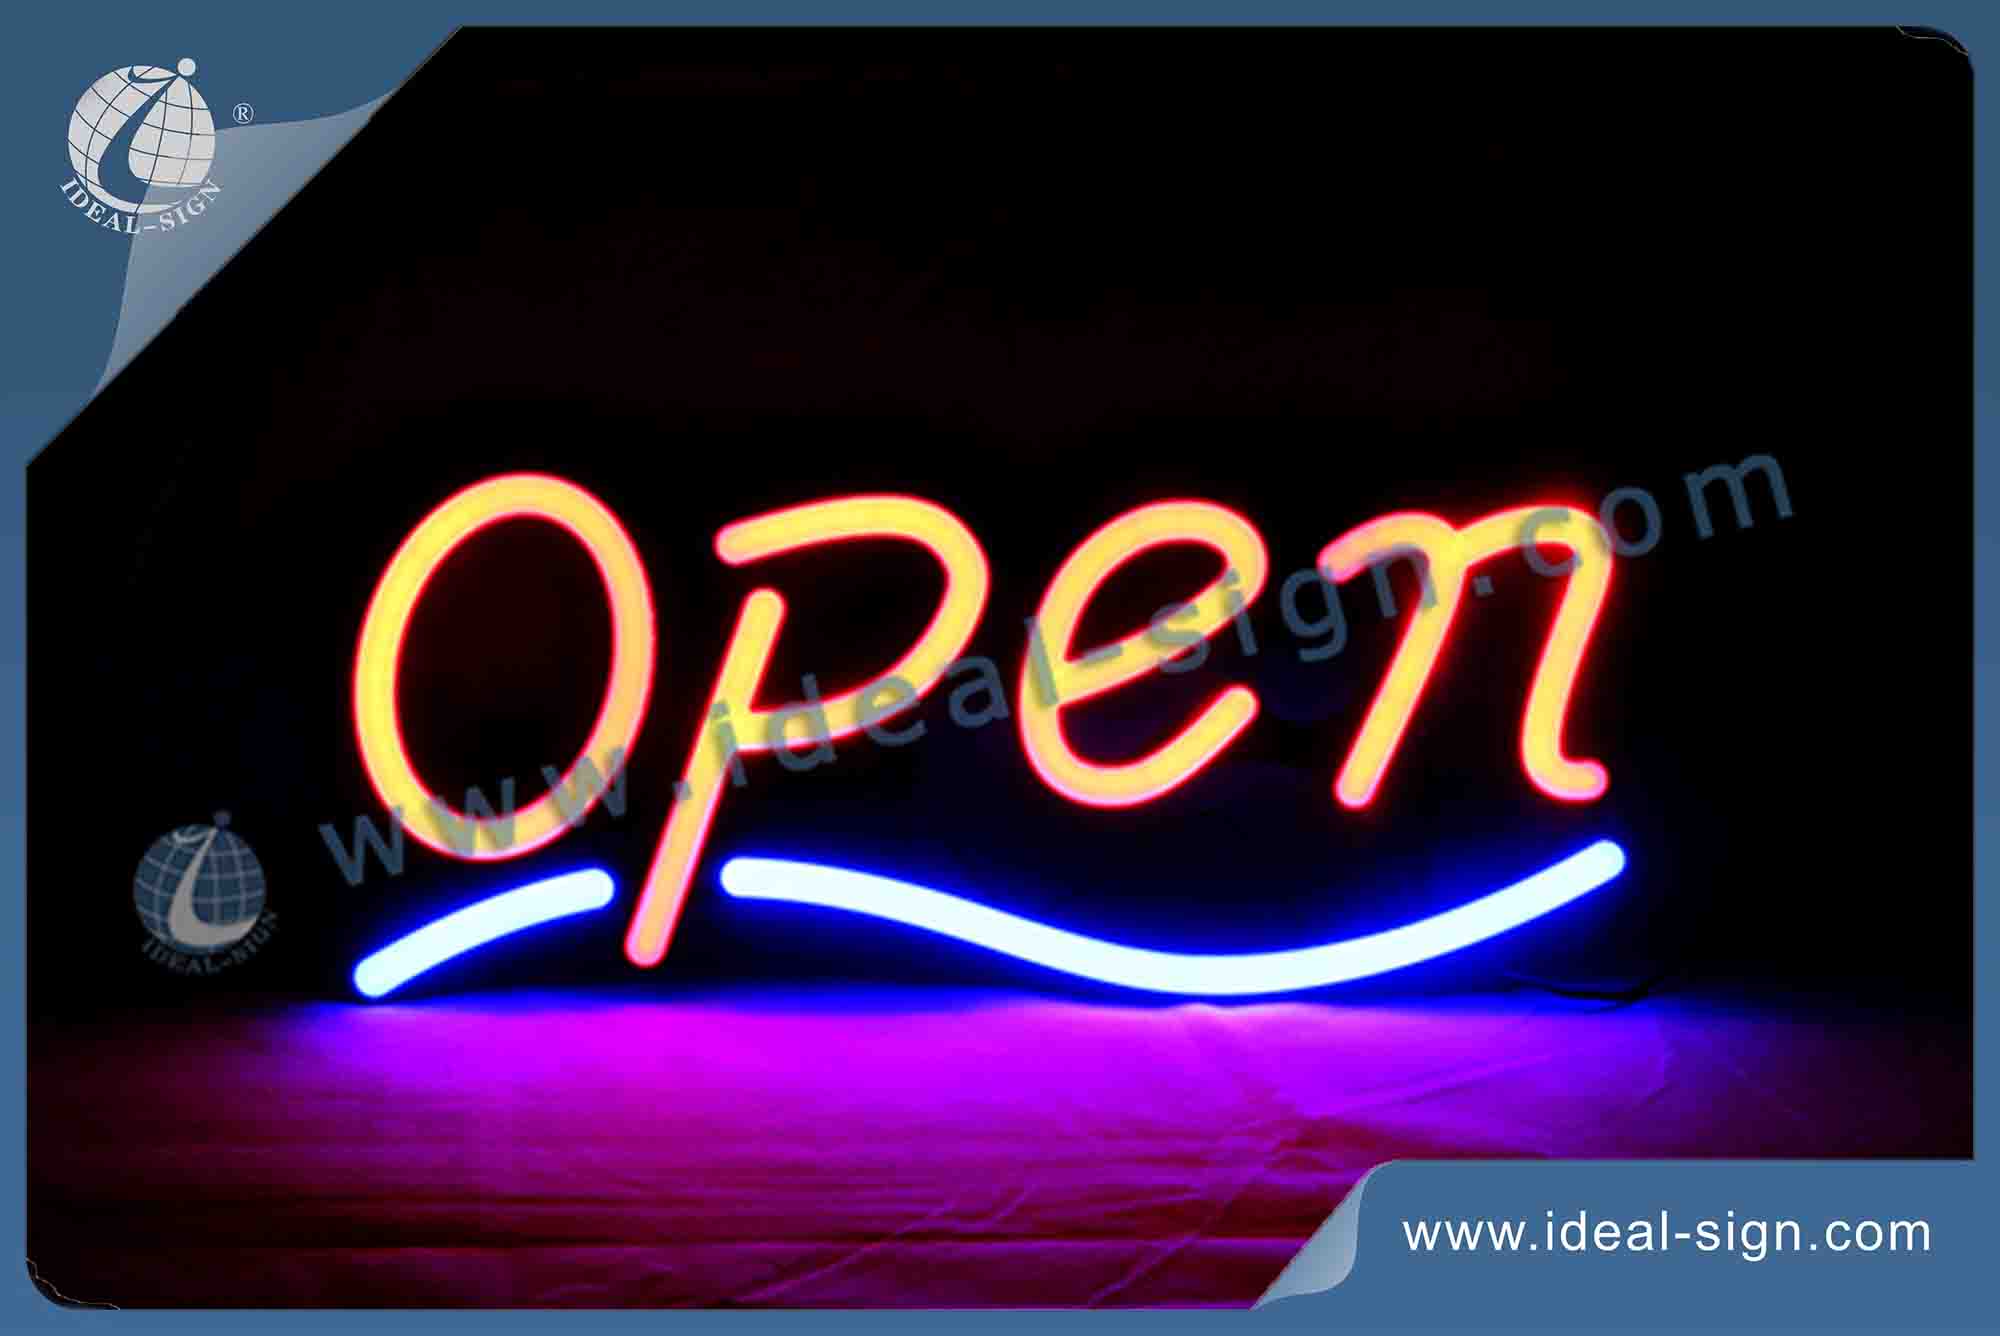 coca cola led sign
custom led neon sign
custom led sign
custom lighted business signs
LED neon sign
led neon signs for sale
open led neon sign
custom outdoor neon signs
led neon signs for sale
neon open sign for sale